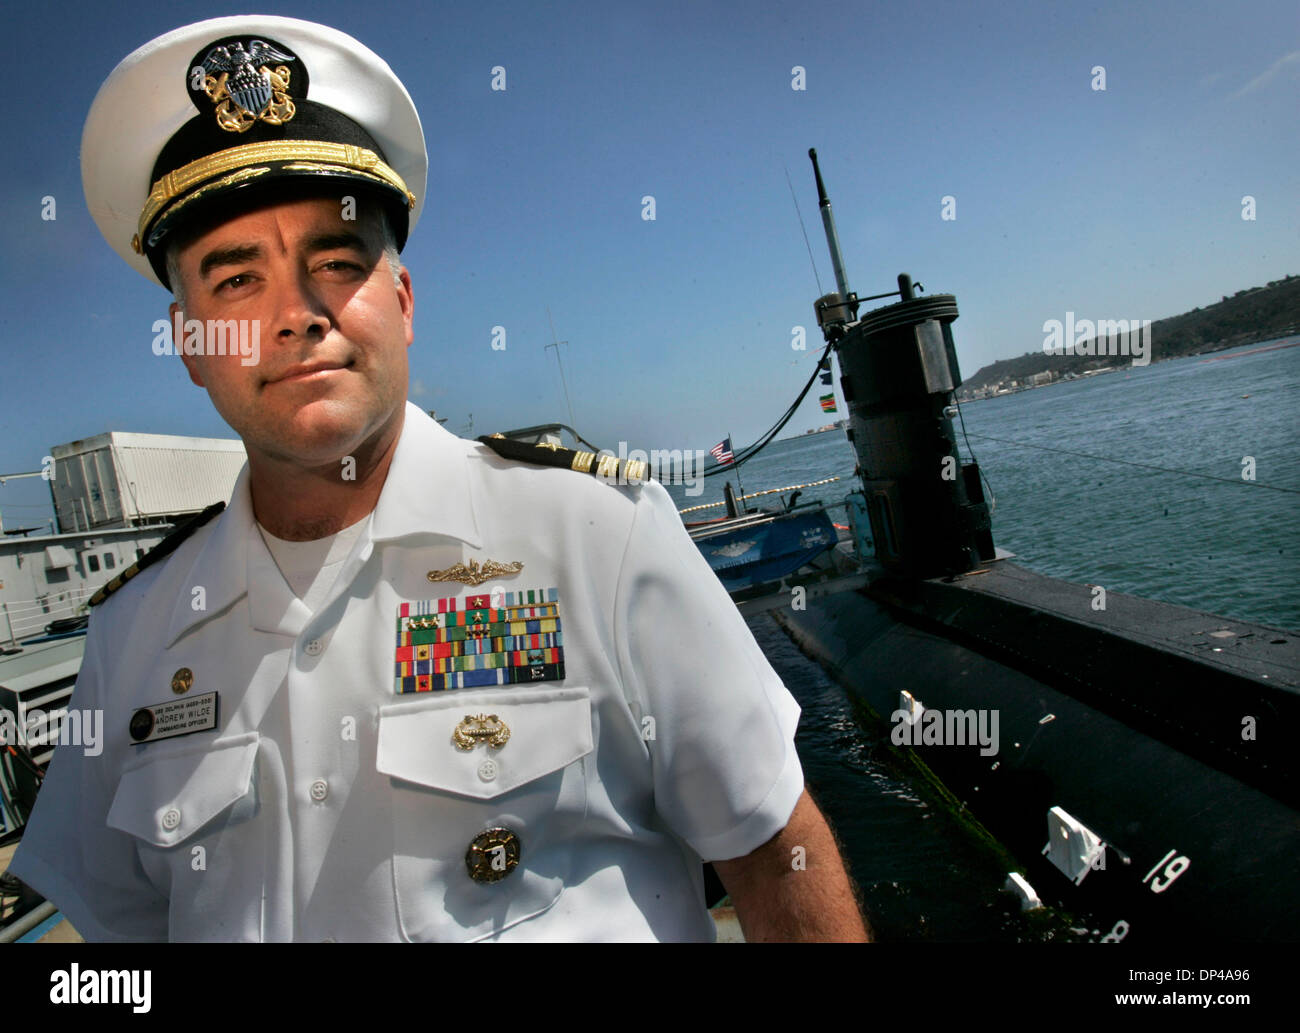 Aug 02, 2006; San Diego, CA, USA; US Navy Commander, ANDREW WILDE, commanding officer of  the USS Dolphin, the US Navy's last Diesel Electric Submarine calls Naval Base Point Loma home and is scheduled to be decommissioned later this year.  The sub recently completed a recent $50 million repair and upgrade.   Mandatory Credit: Photo by Howard Lipin/SDU-T/ZUMA Press. (©) Copyright 2 Stock Photo